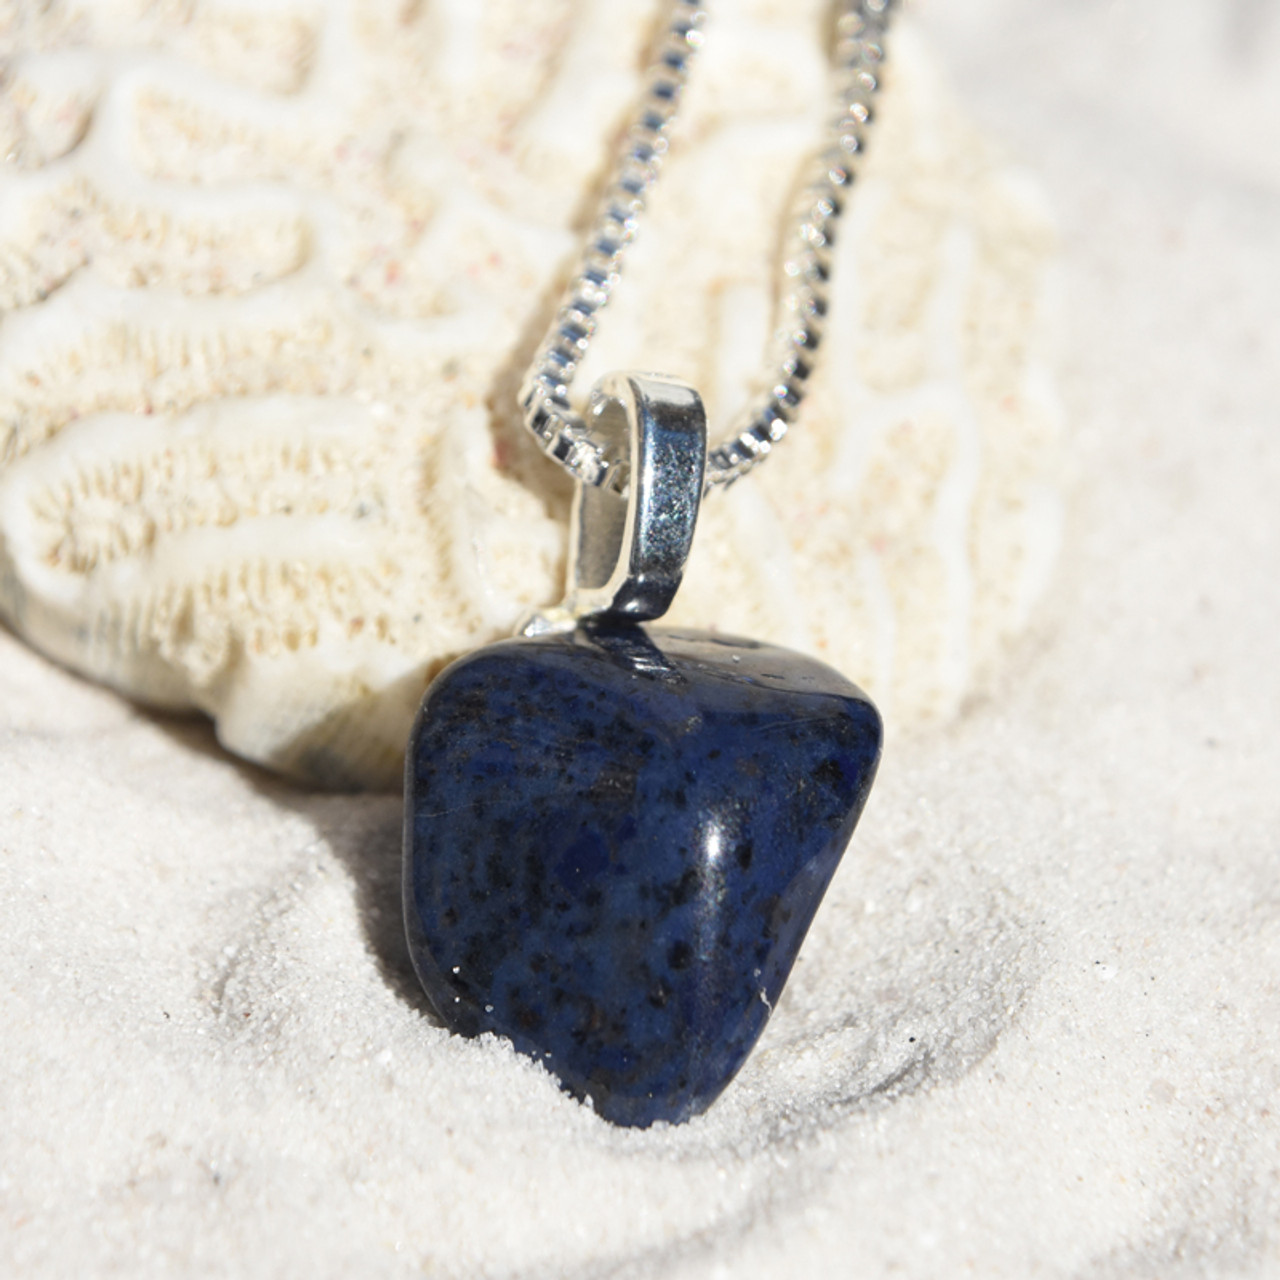 Tumbled Dumortierite Stone Necklace - Choose Sterling Silver Chain or Leather Cord - Quantity of 1 - Made to Order